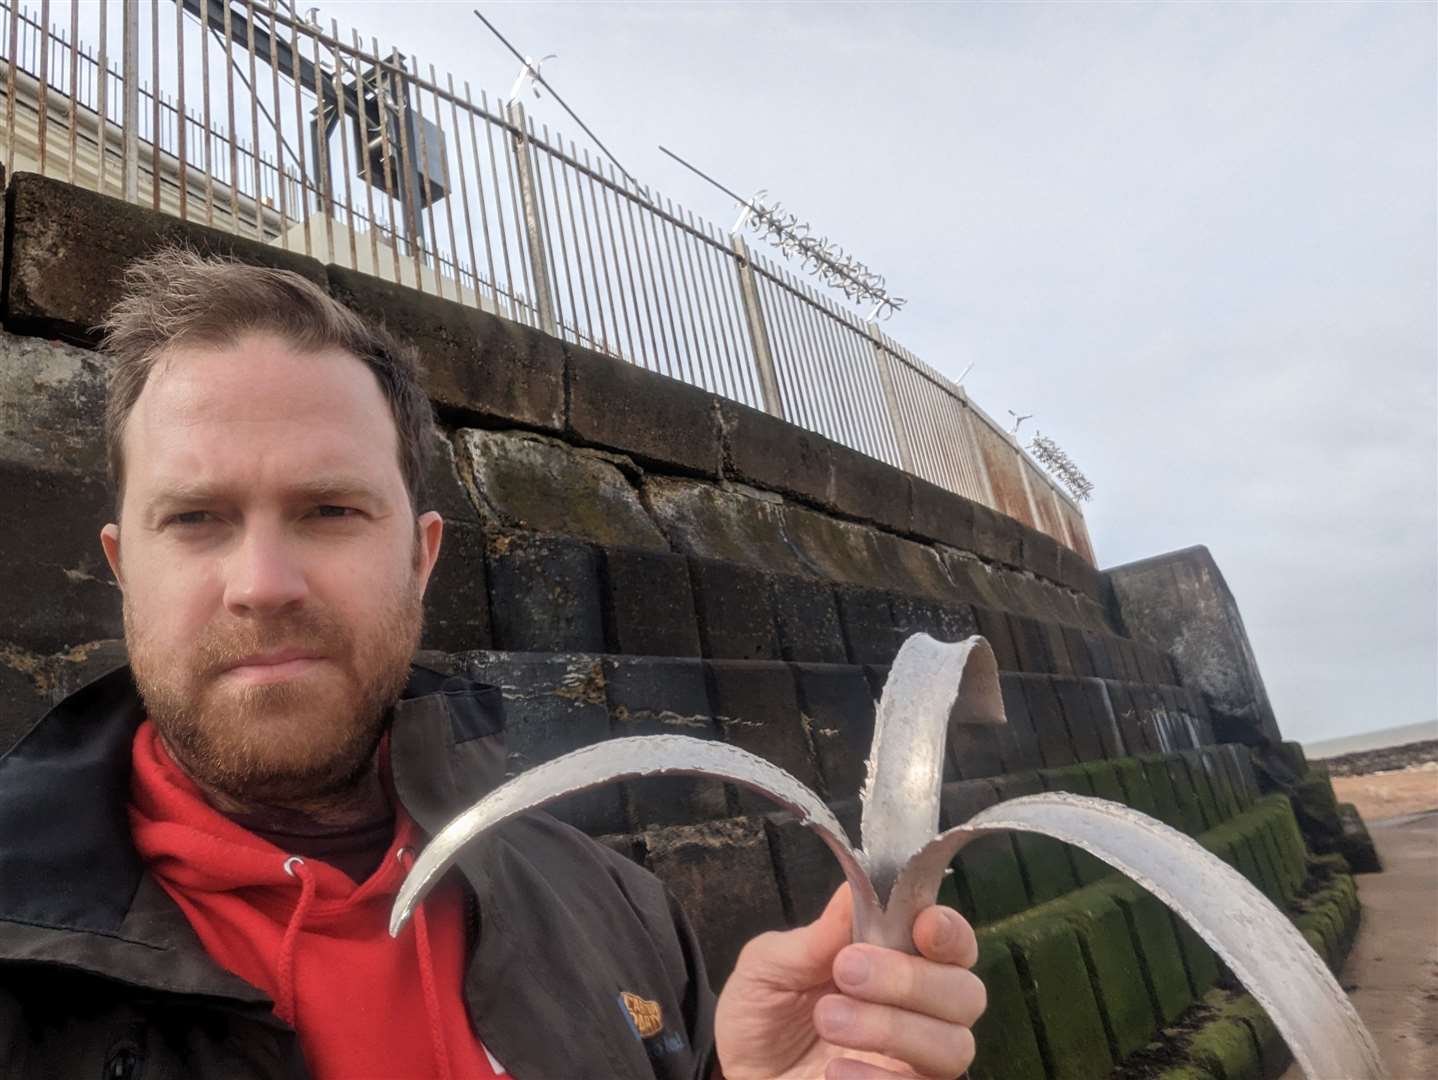 Cllr Rob Yates found the metal spikes on a beach in Margate